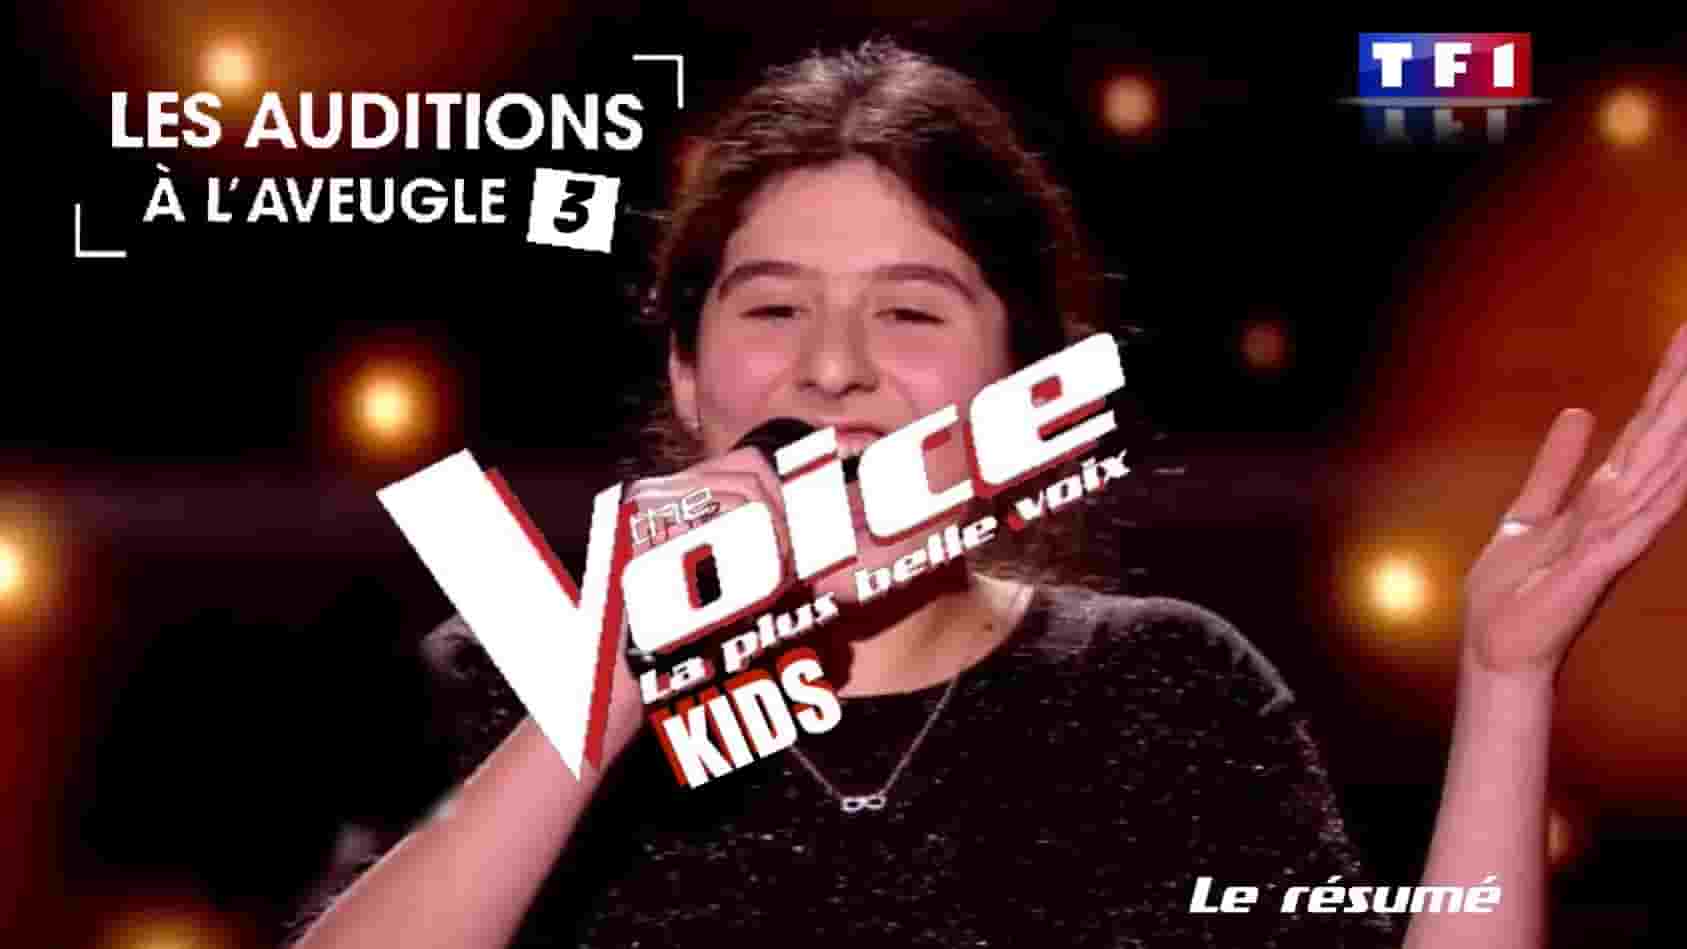 The Voice Kids 5 : Auditions n°3 - ©/-\ll in One TV, All rights reserved. Do not copy. Reproduction Interdite